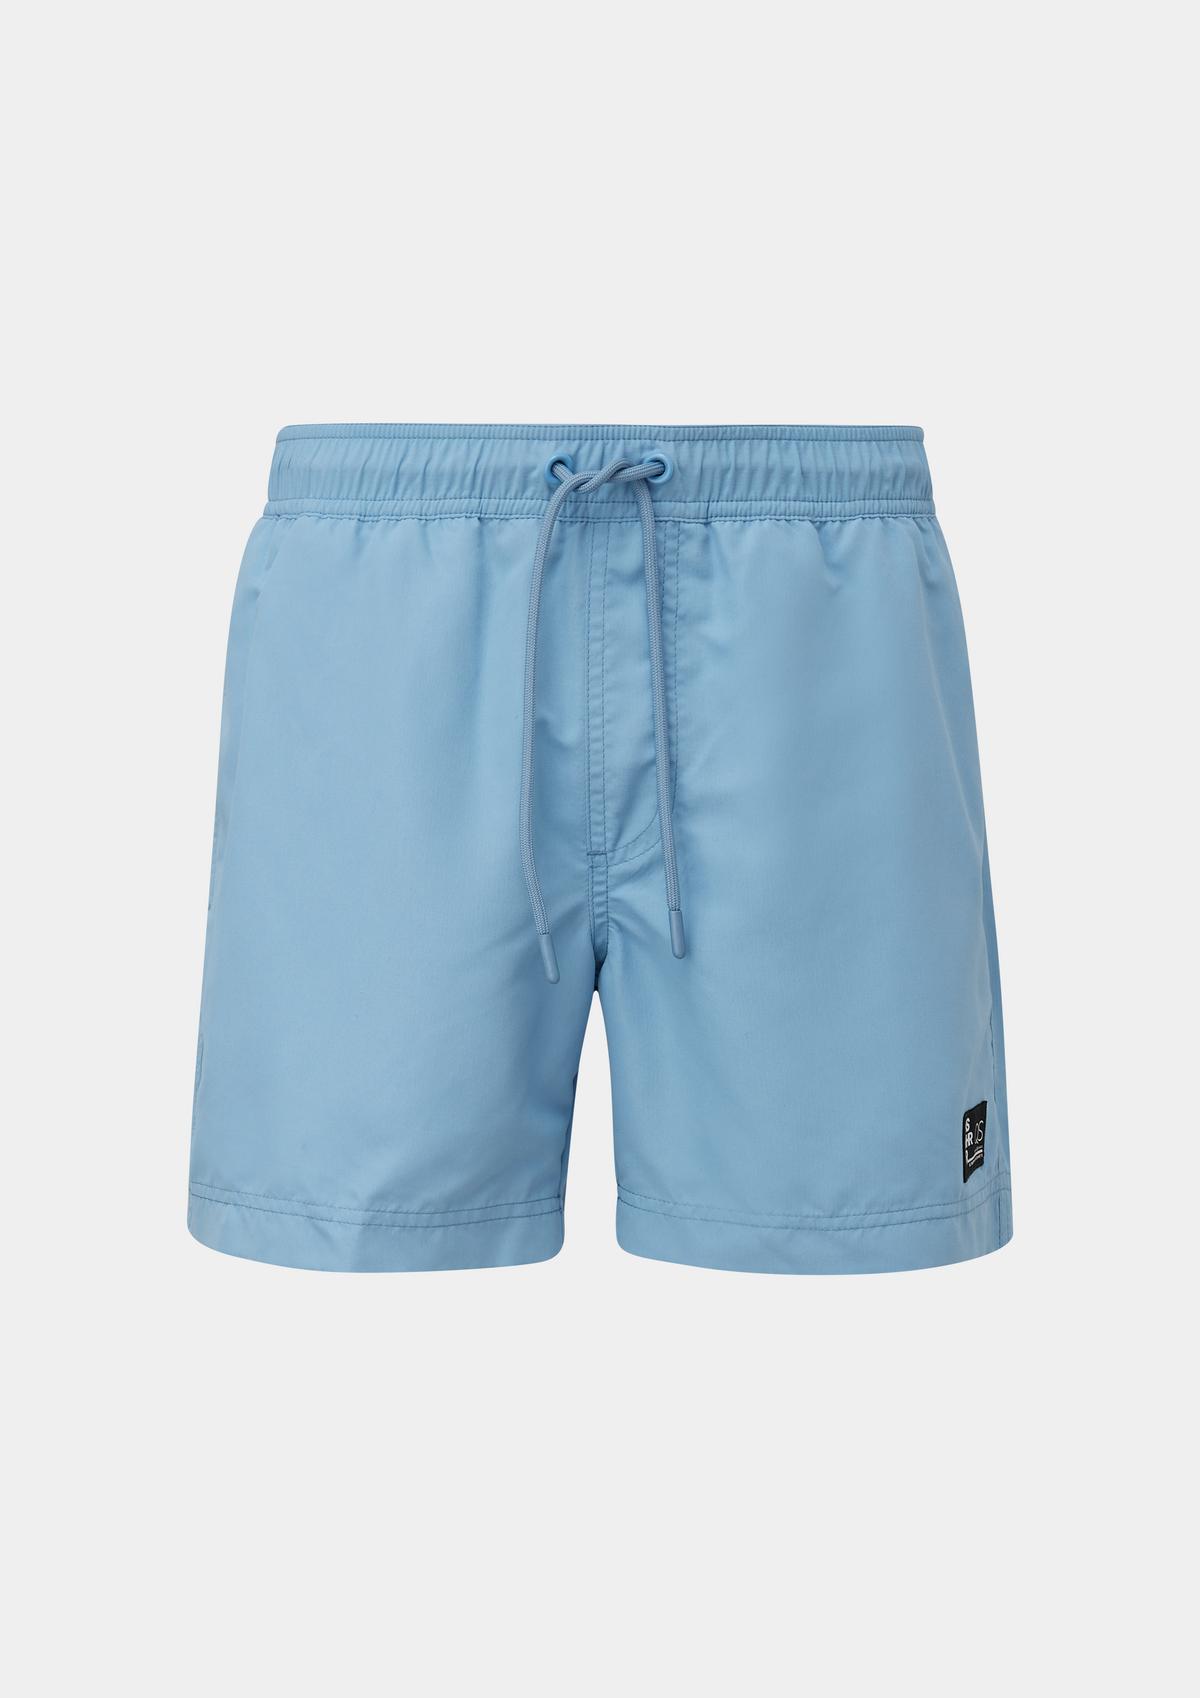 s.Oliver Badehose mit Label-Patch